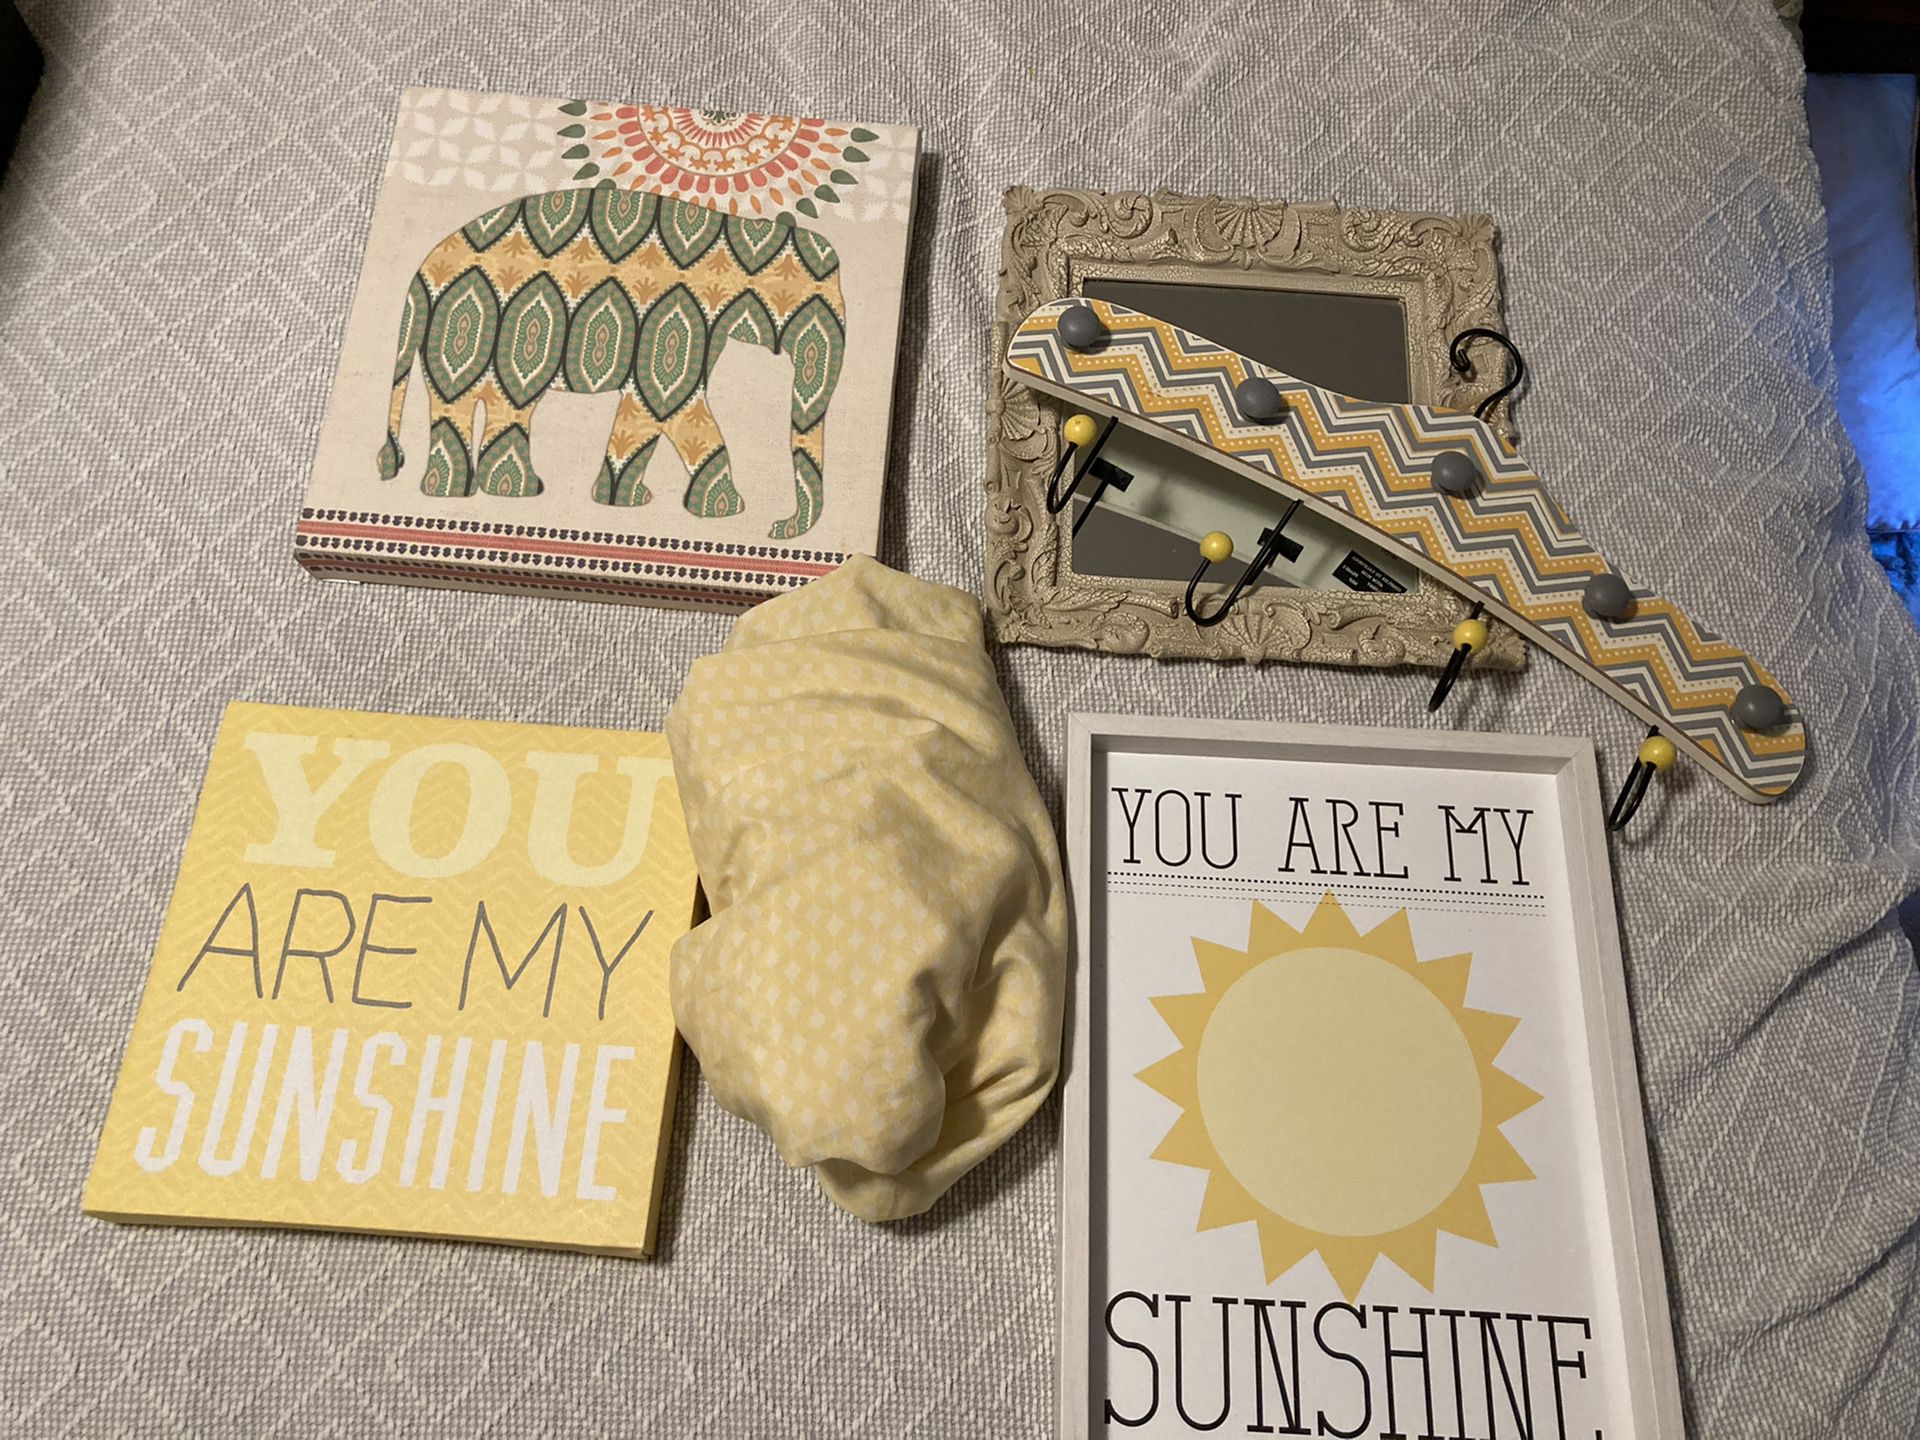 Lot Nursery Decor, You Are My Sunshine, House Decorations, Yellow and Grey, Mirror, Elephant Picture, Crib Sheet